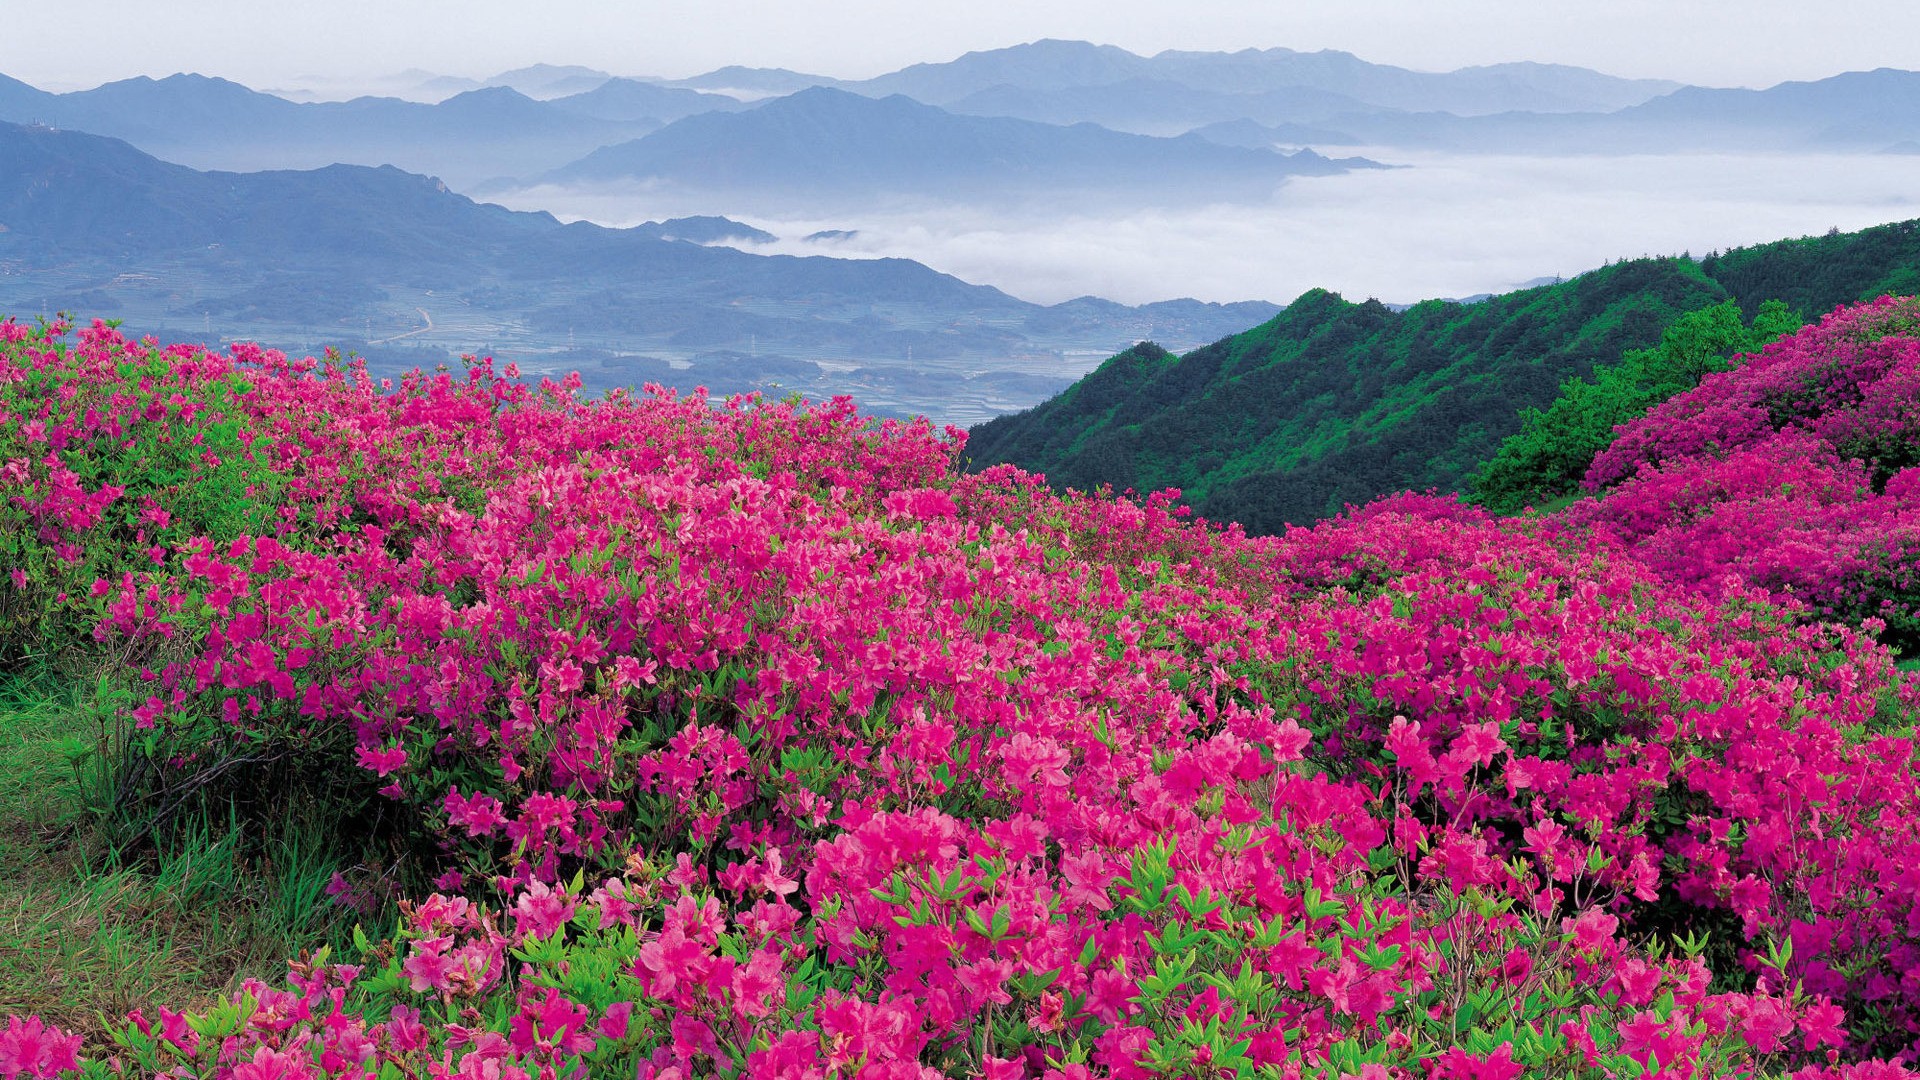 Nature___Flowers_Flowers_in_the_mountains_042313_.jpg